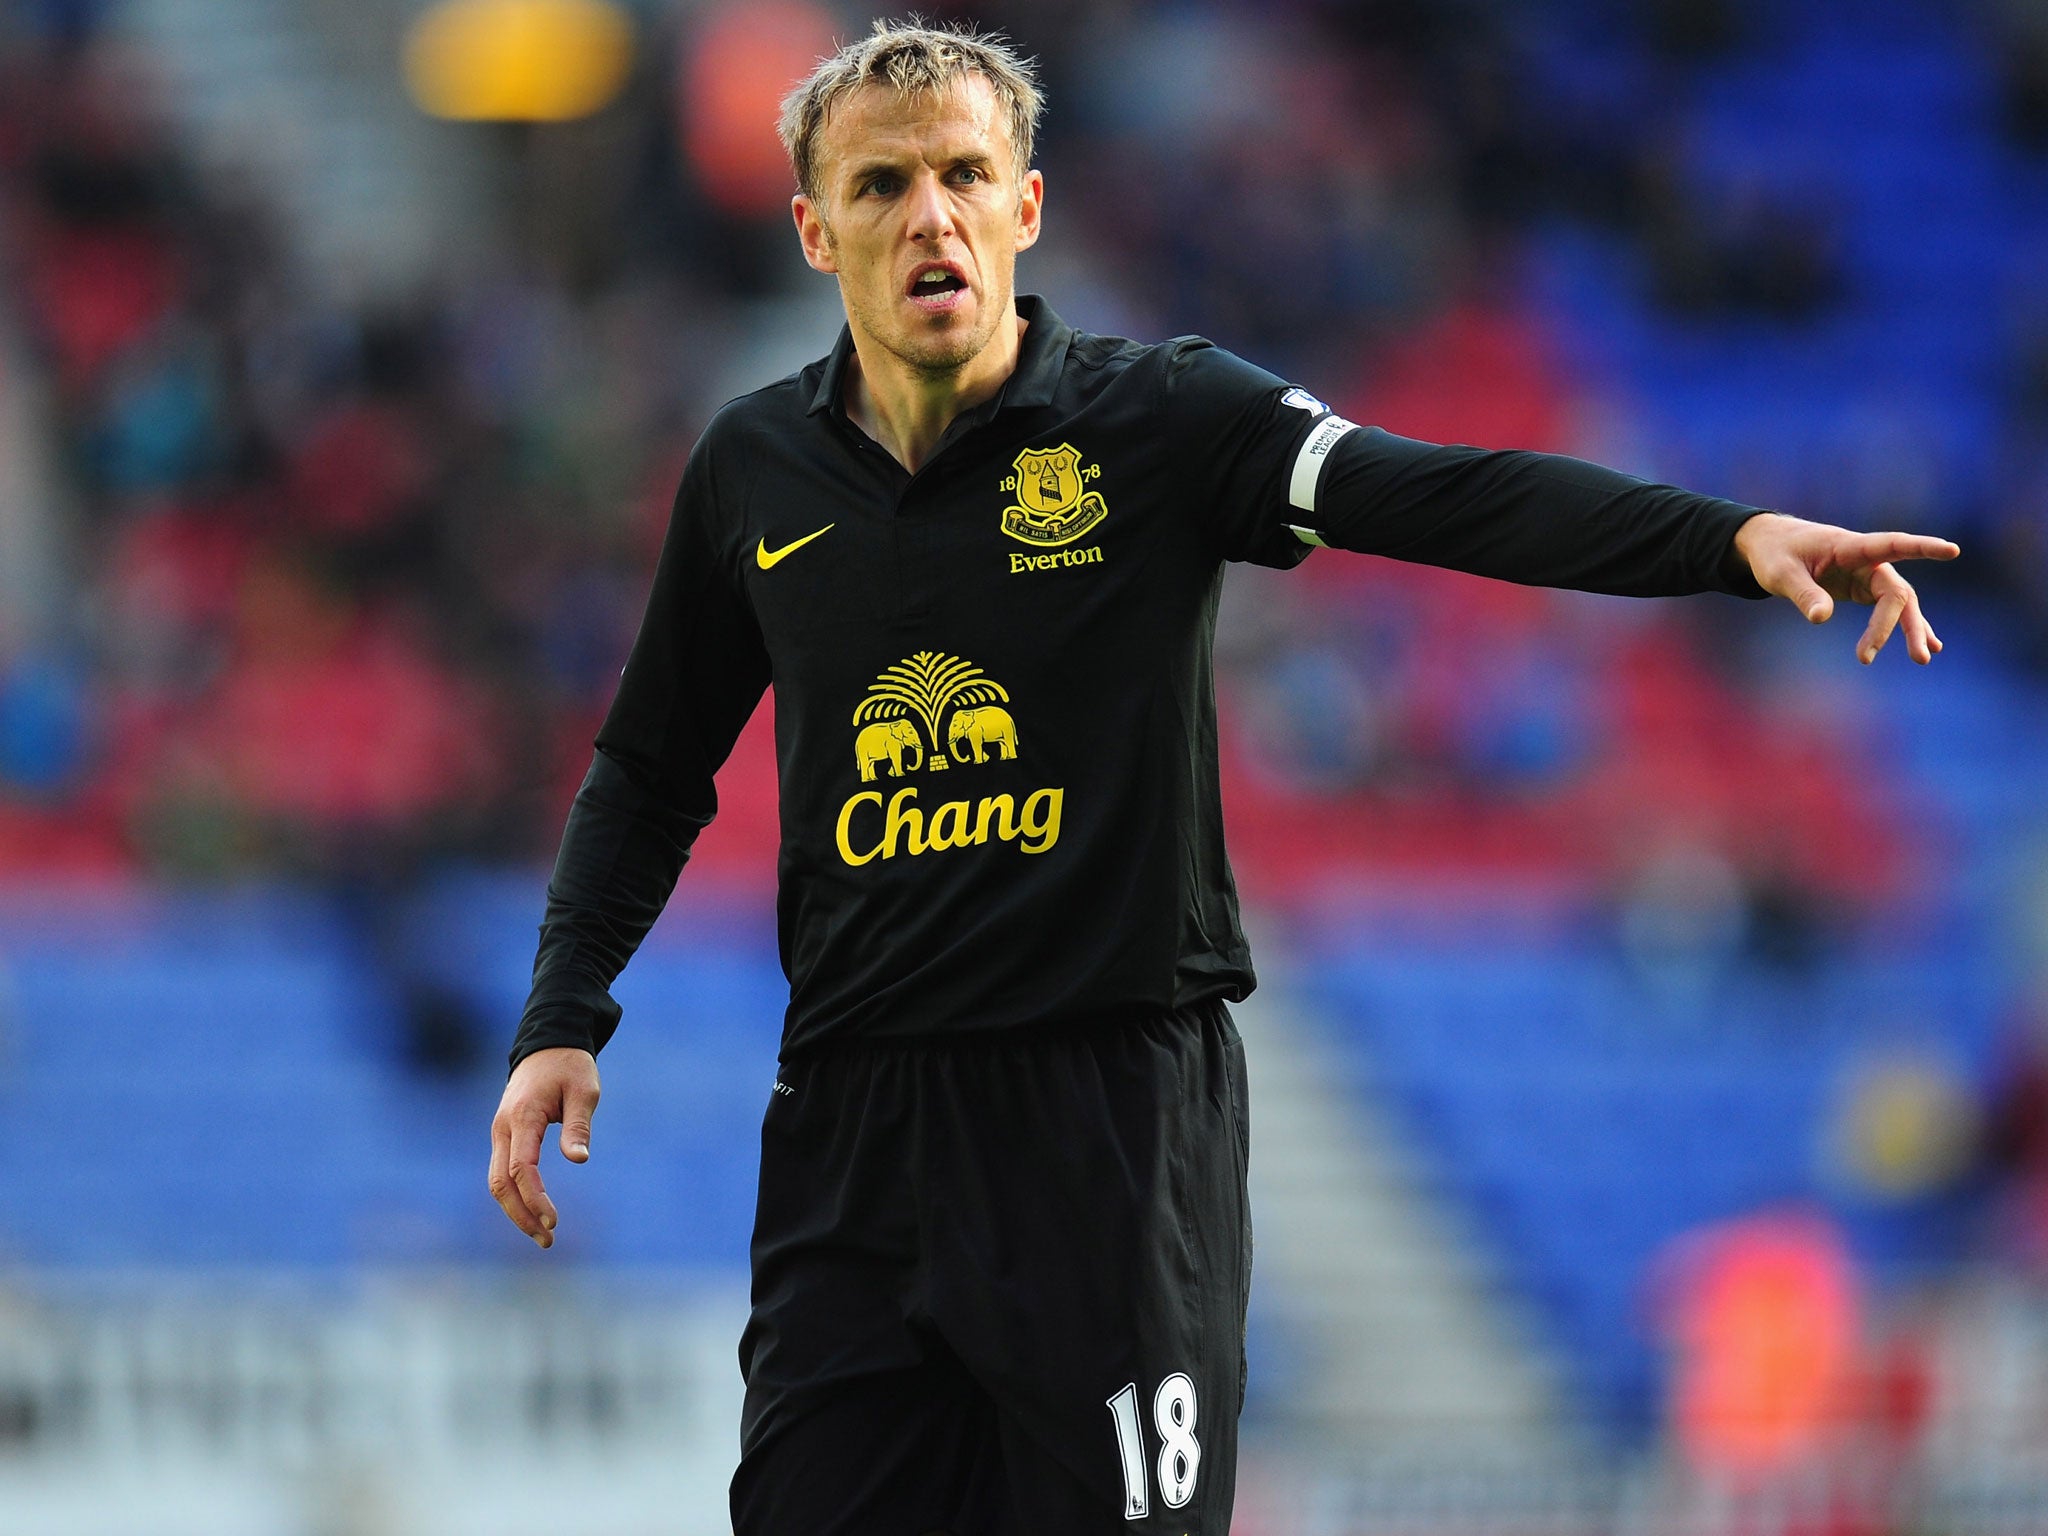 Phil Neville The Everton skipper was recently hailed by boss David Moyes for his longevity at the top level after joining an exclusive club of players to make 500 appearances in the Premier League. Neville himself has said he hopes to continue